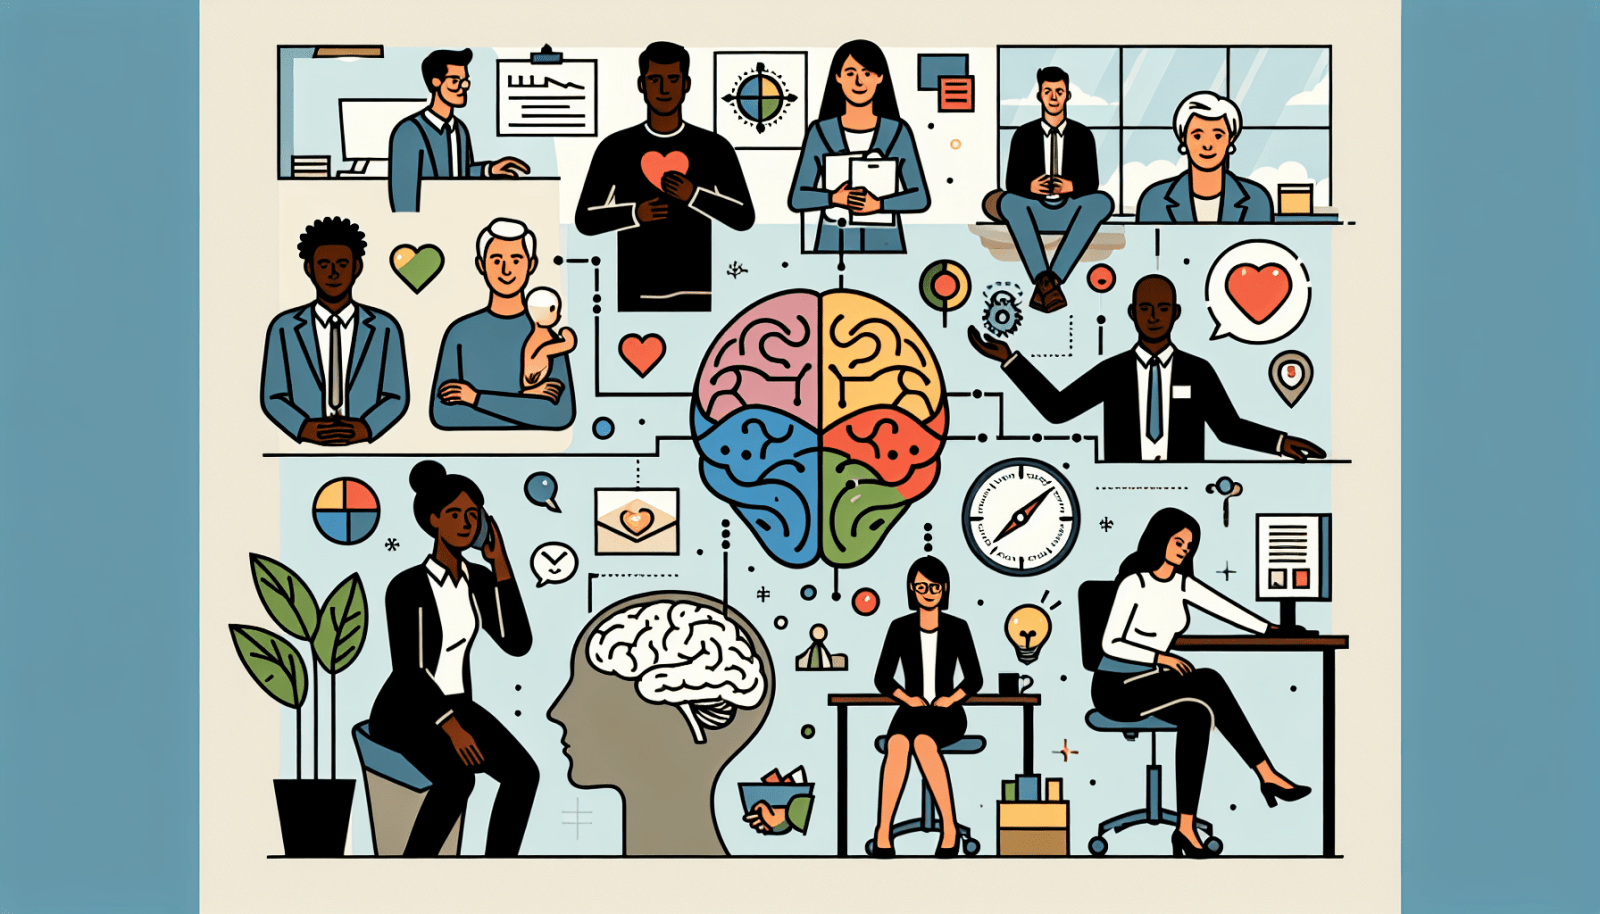 Illustration of a collage with various scenes of professional people in work environments, intermixed with symbols of ideas, communication, technology, and creativity, including a colorfully segmented brain.